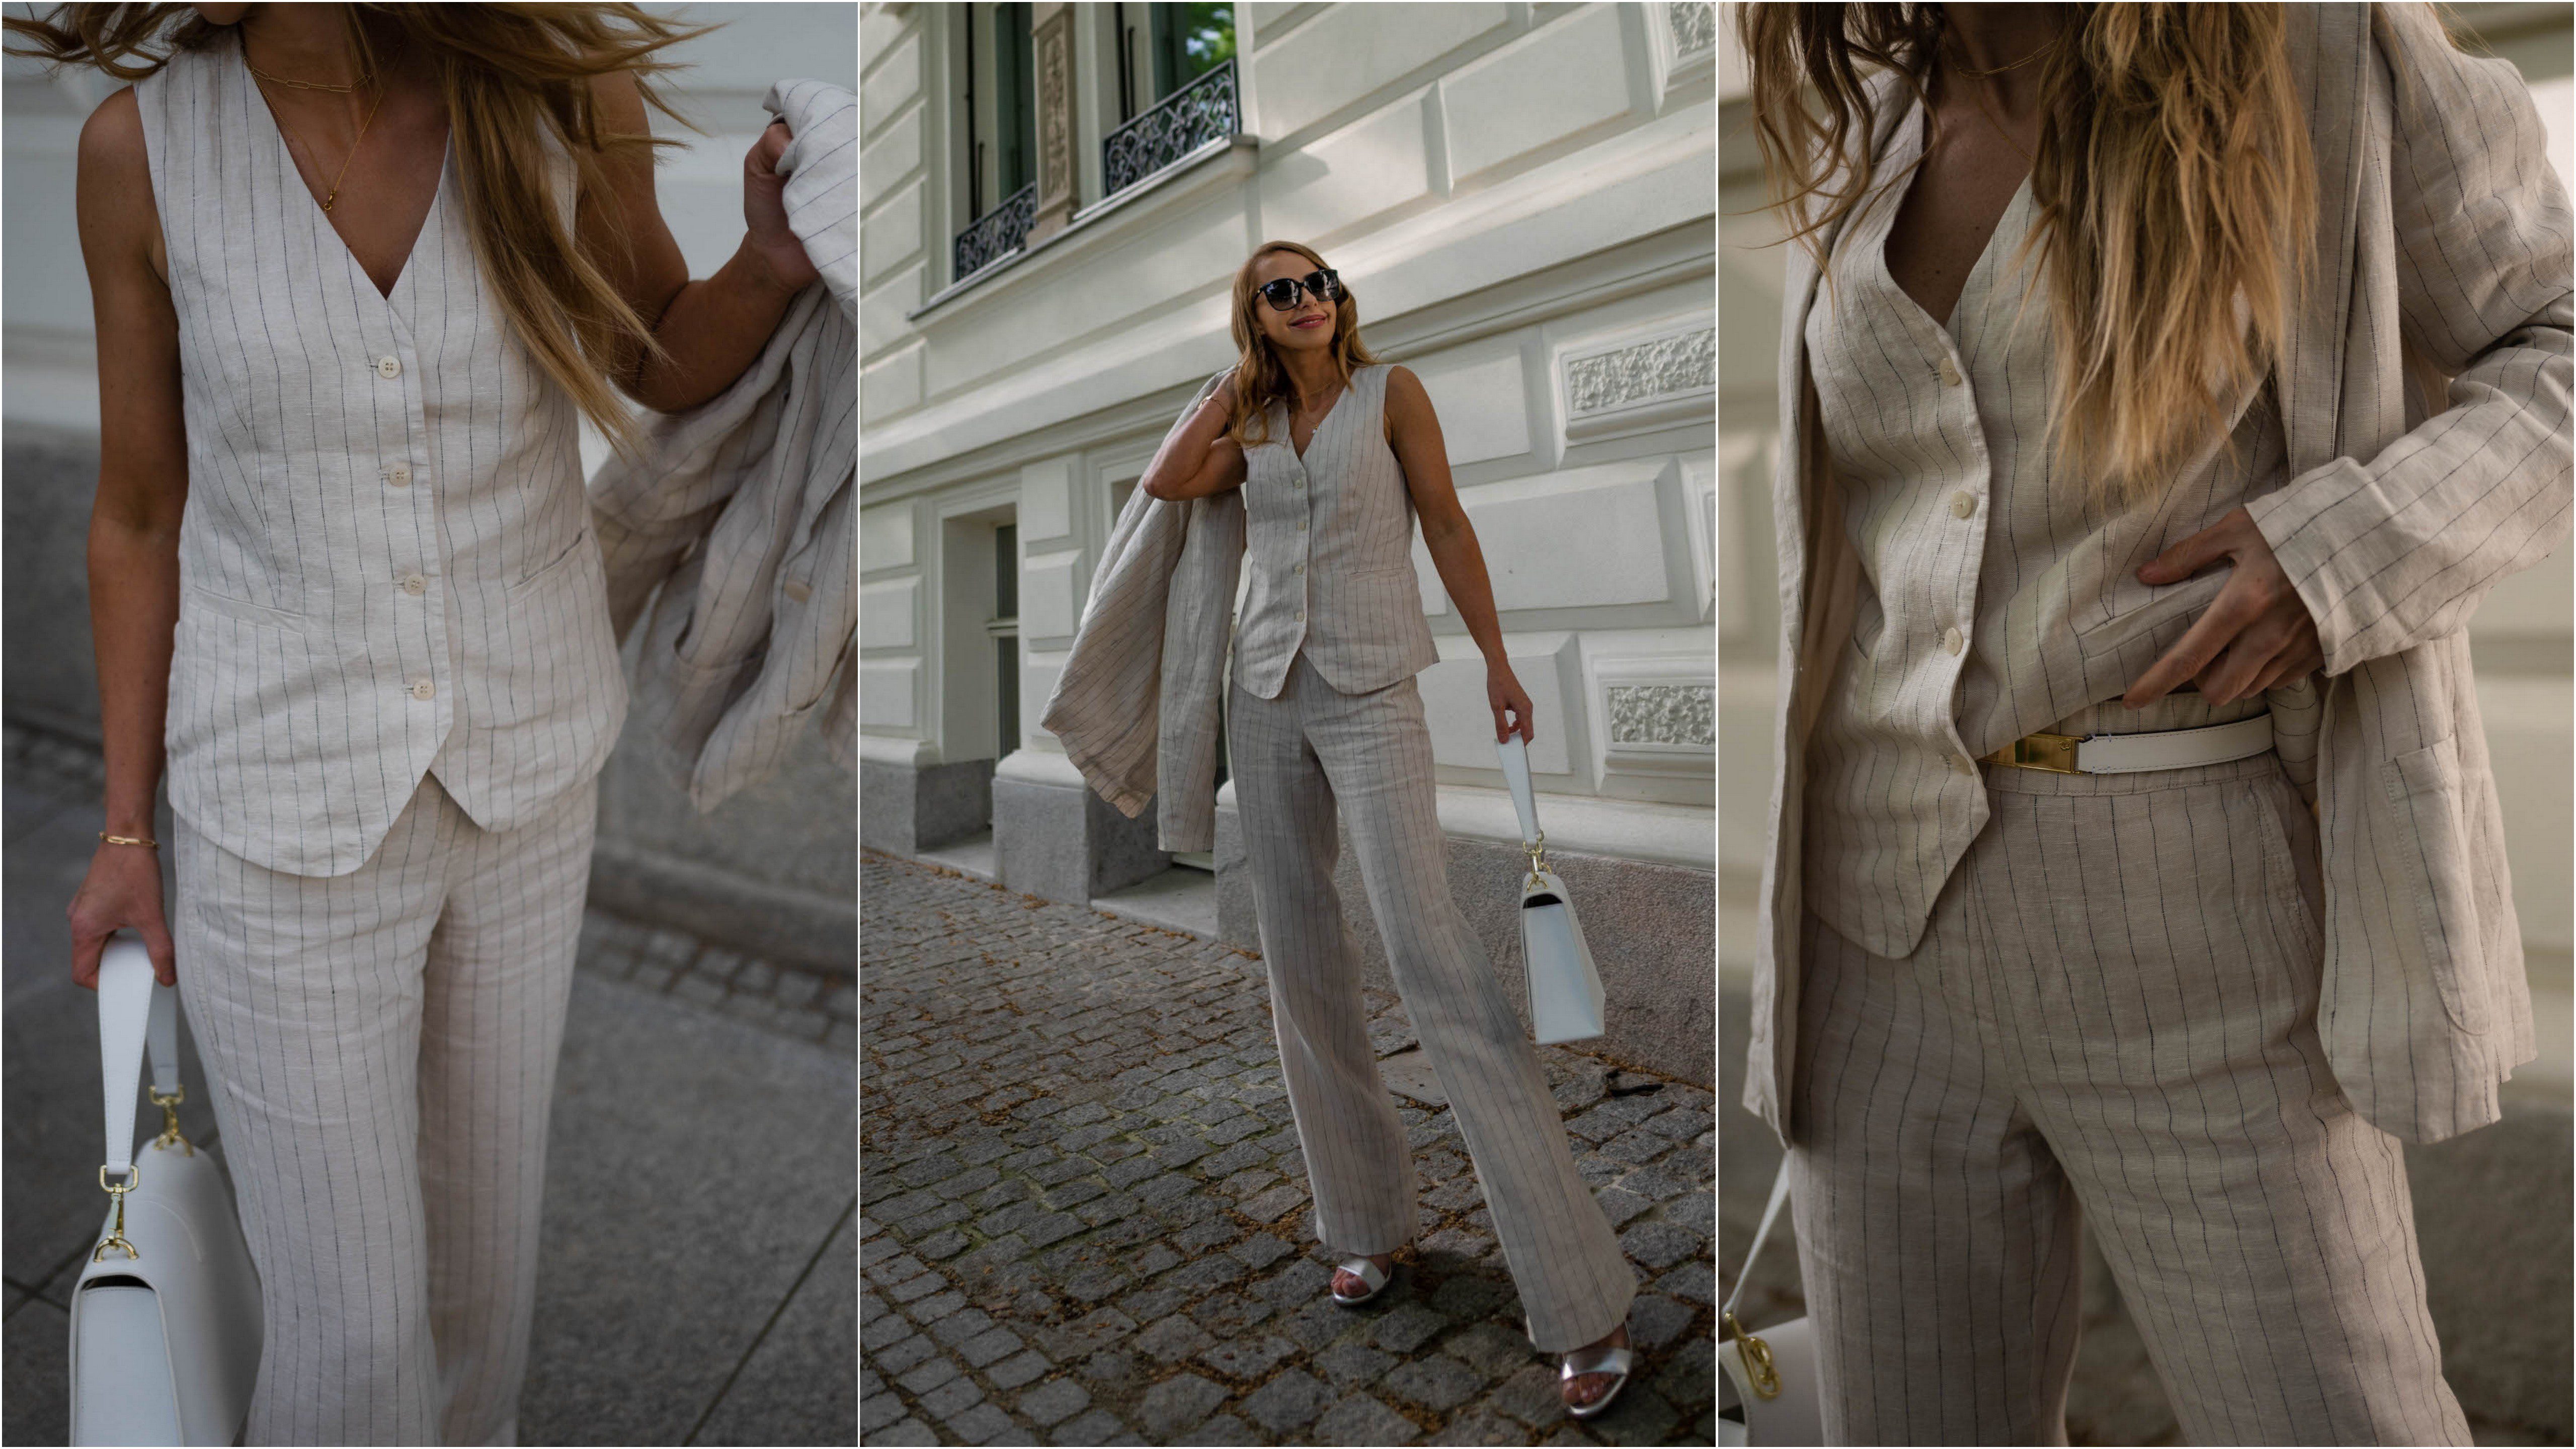 Influencer Kamila chose the pinstripe linen suit from Olsen's City Culture collection.